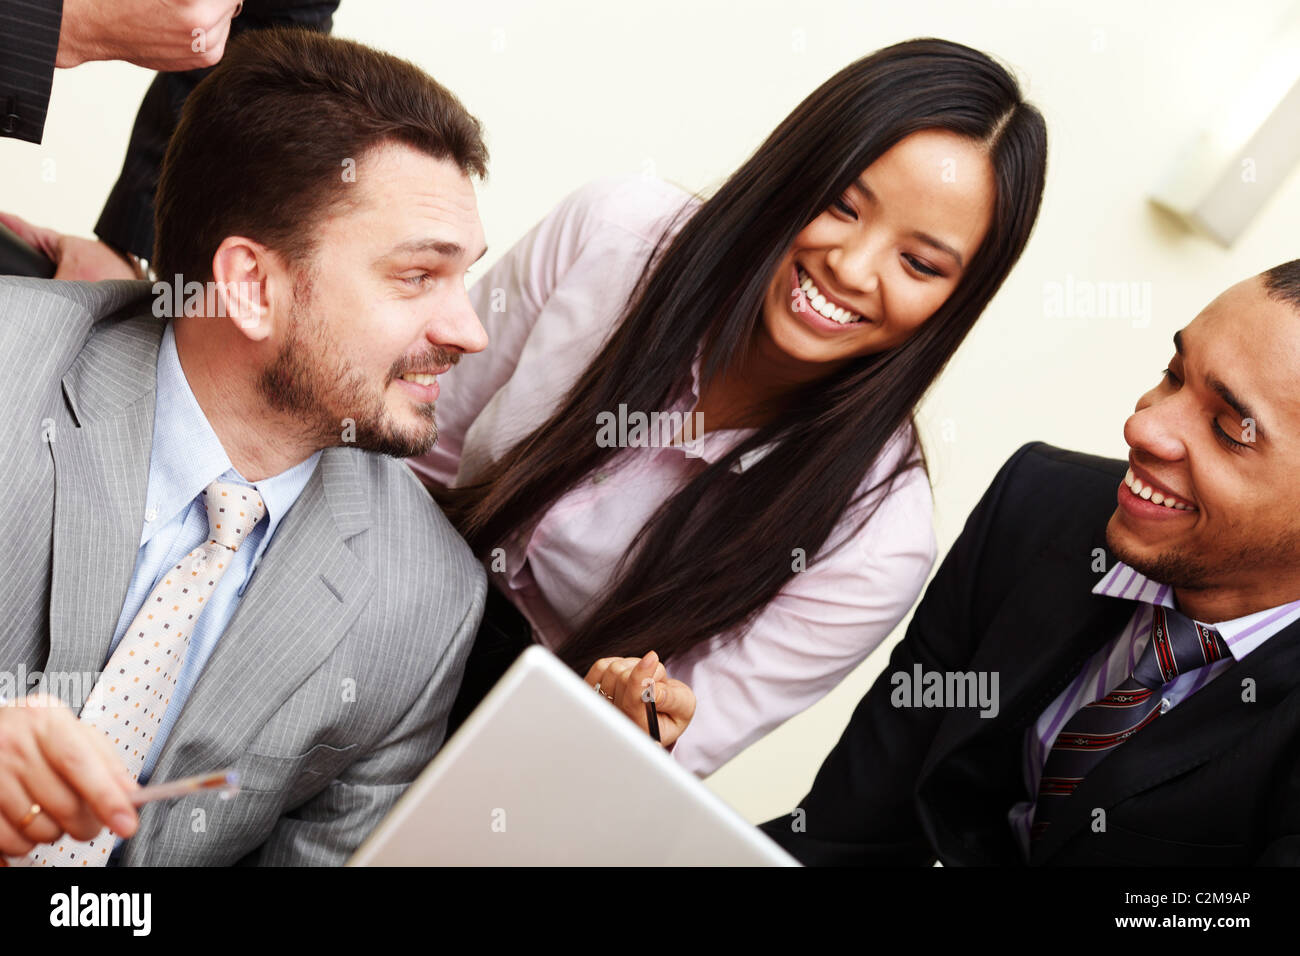 Multi ethnic business team at a meeting. Interacting. Stock Photo